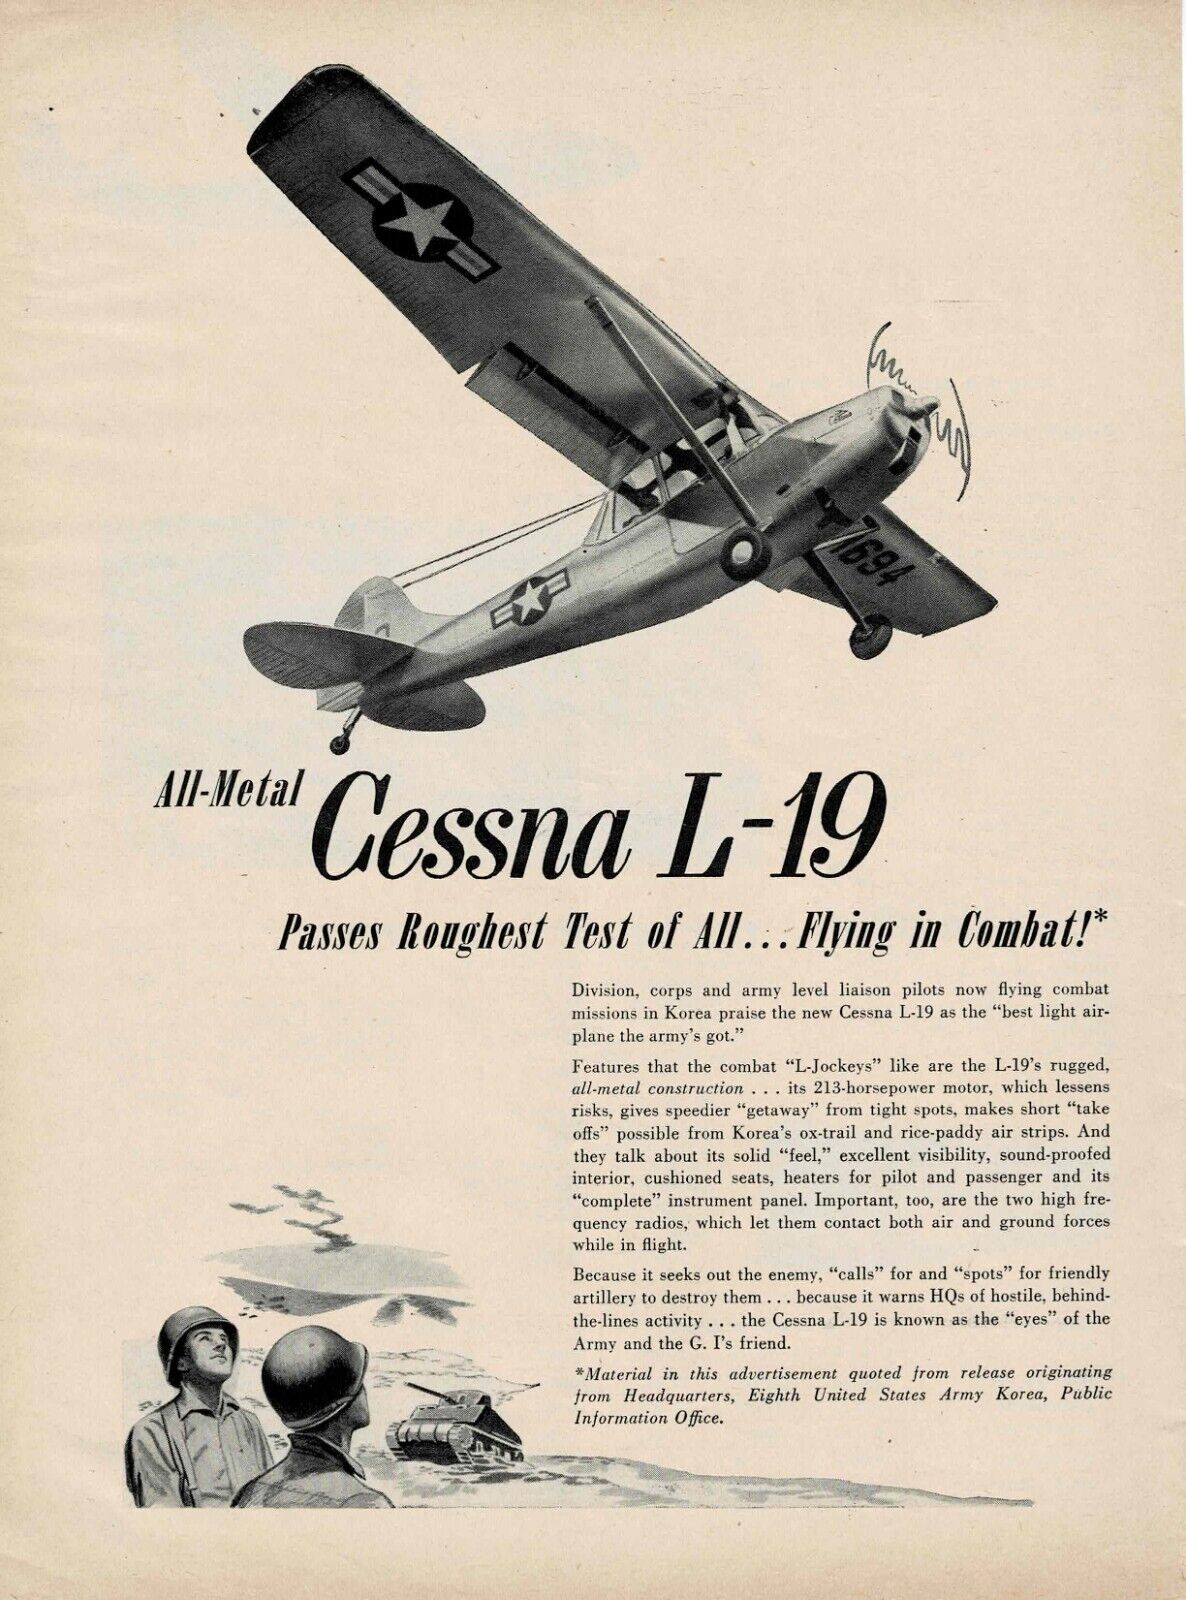 All-Metal - Cessna L-19 - Flying in Combat - 1951 - Vintage Print Ad